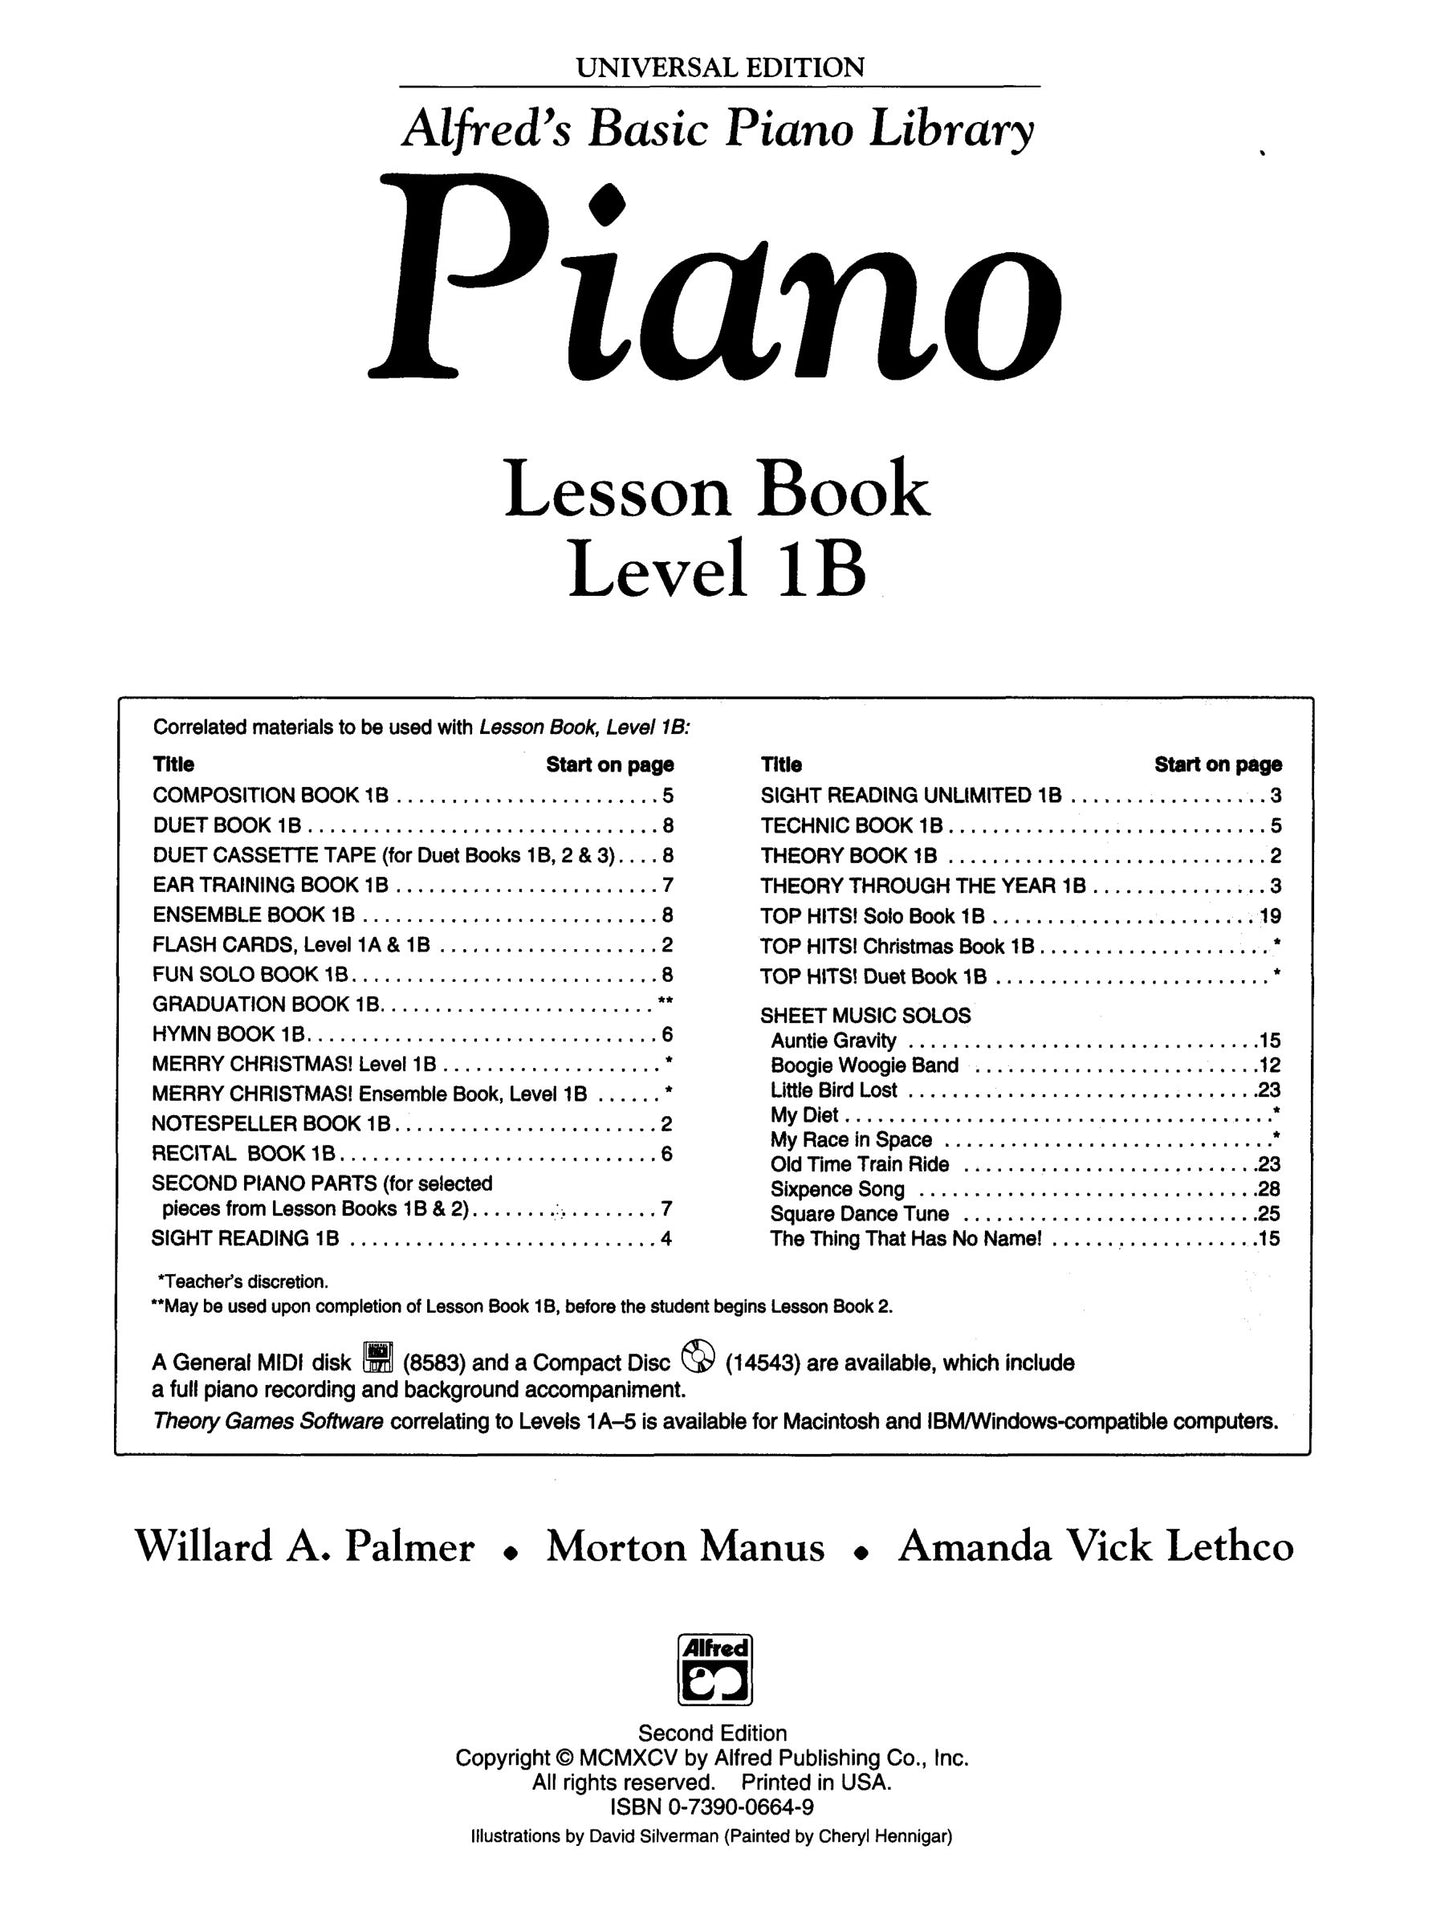 Alfred's Basic Piano Library - Lesson Book Level 1B with Cd (Universal Edition)